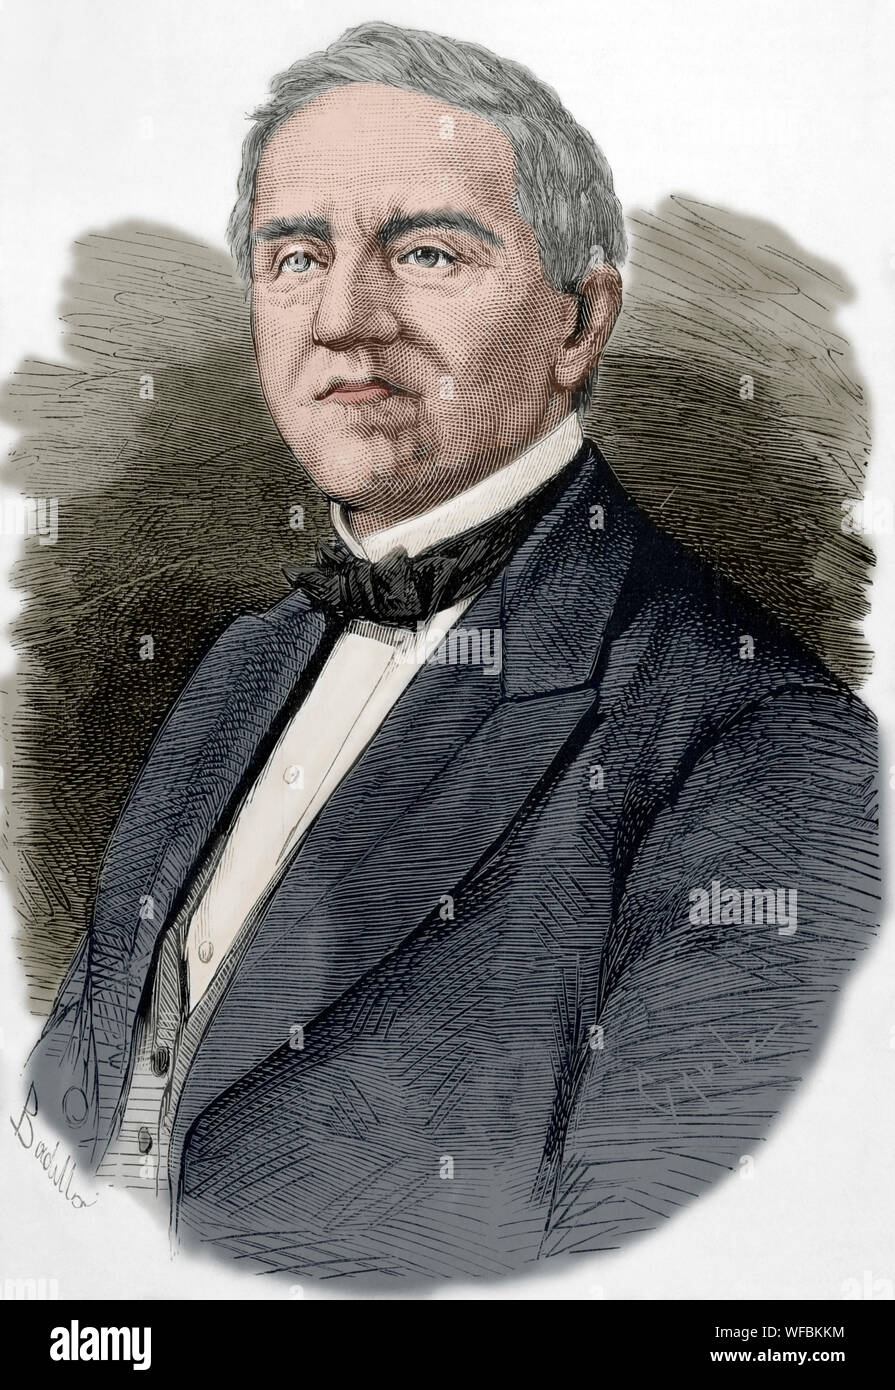 Samuel J. Tilden (1814-1886). Lawyer, governor of New York and Democratic presidential candidate in the disputed election of 1876. Drawing by Badillo. Engraving by Capuz. La Ilustracion Española y Americana, September 8, 1876. Later colouration. Stock Photo